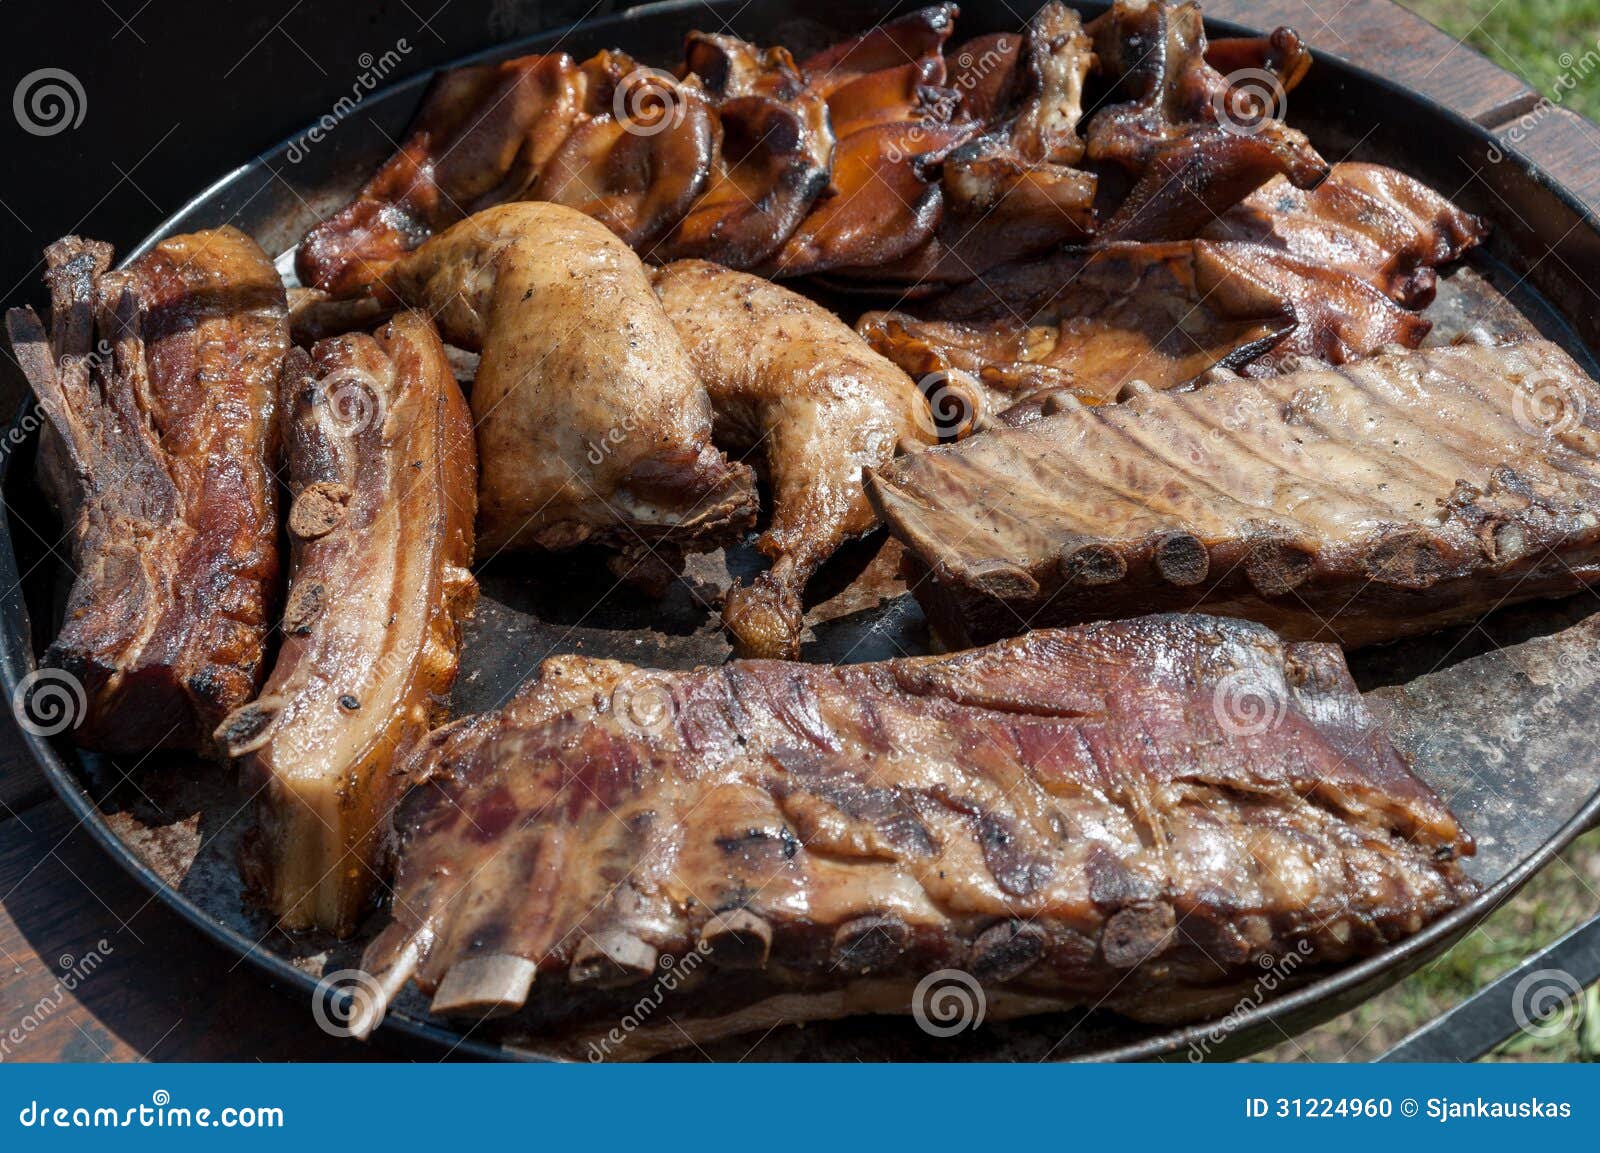 grilled meat assortment